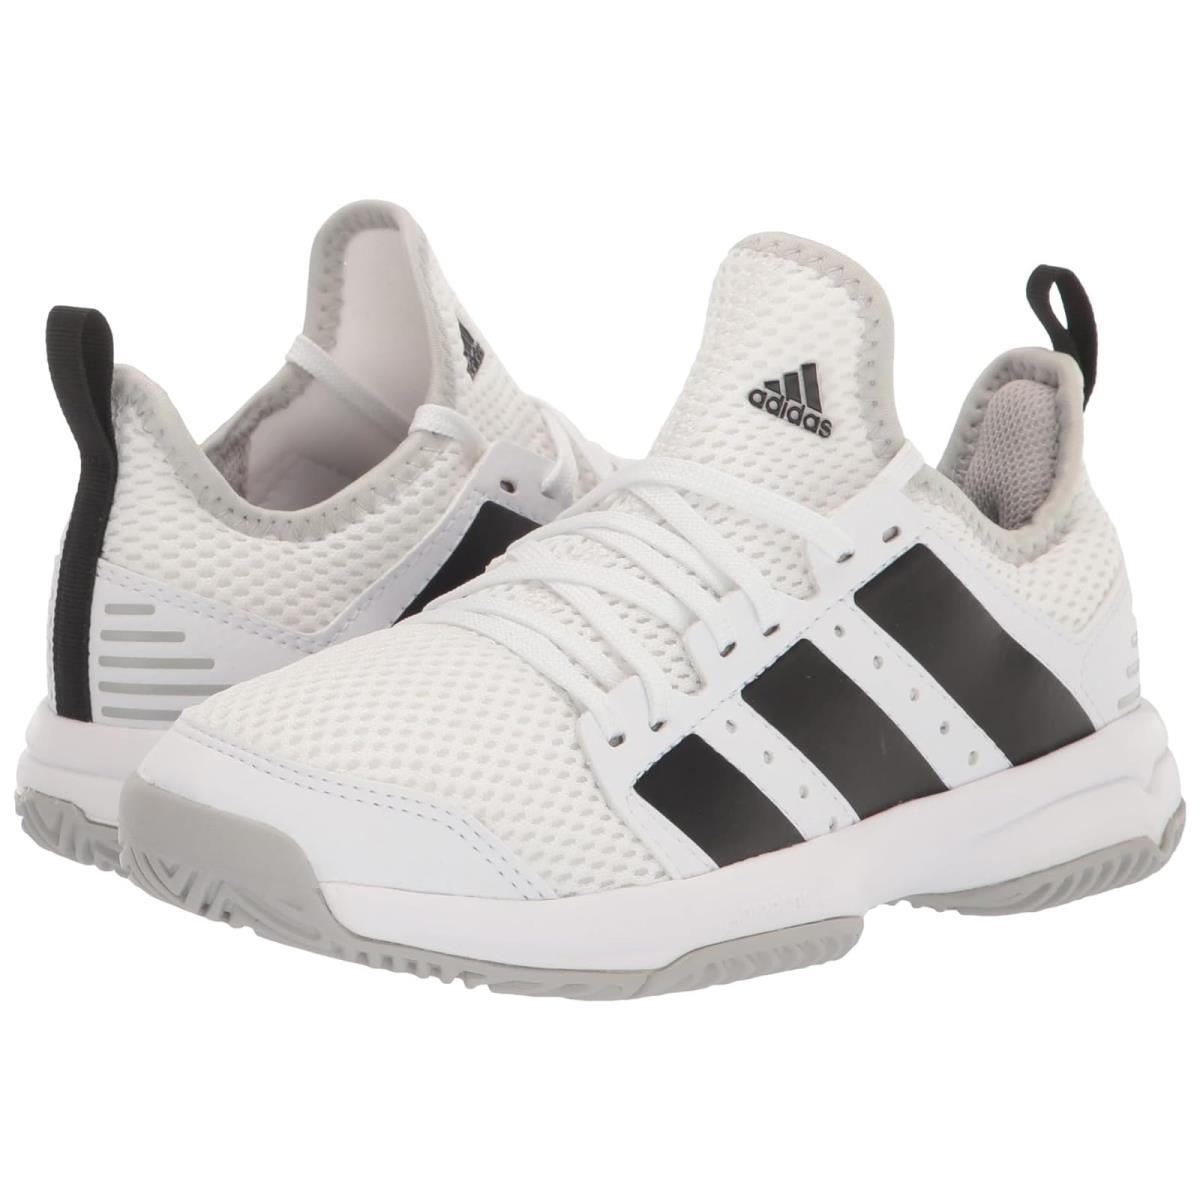 Girl`s Shoes Adidas Kids Stabil Indoor Volleyball Little Kid/big Kid White/Black/Grey